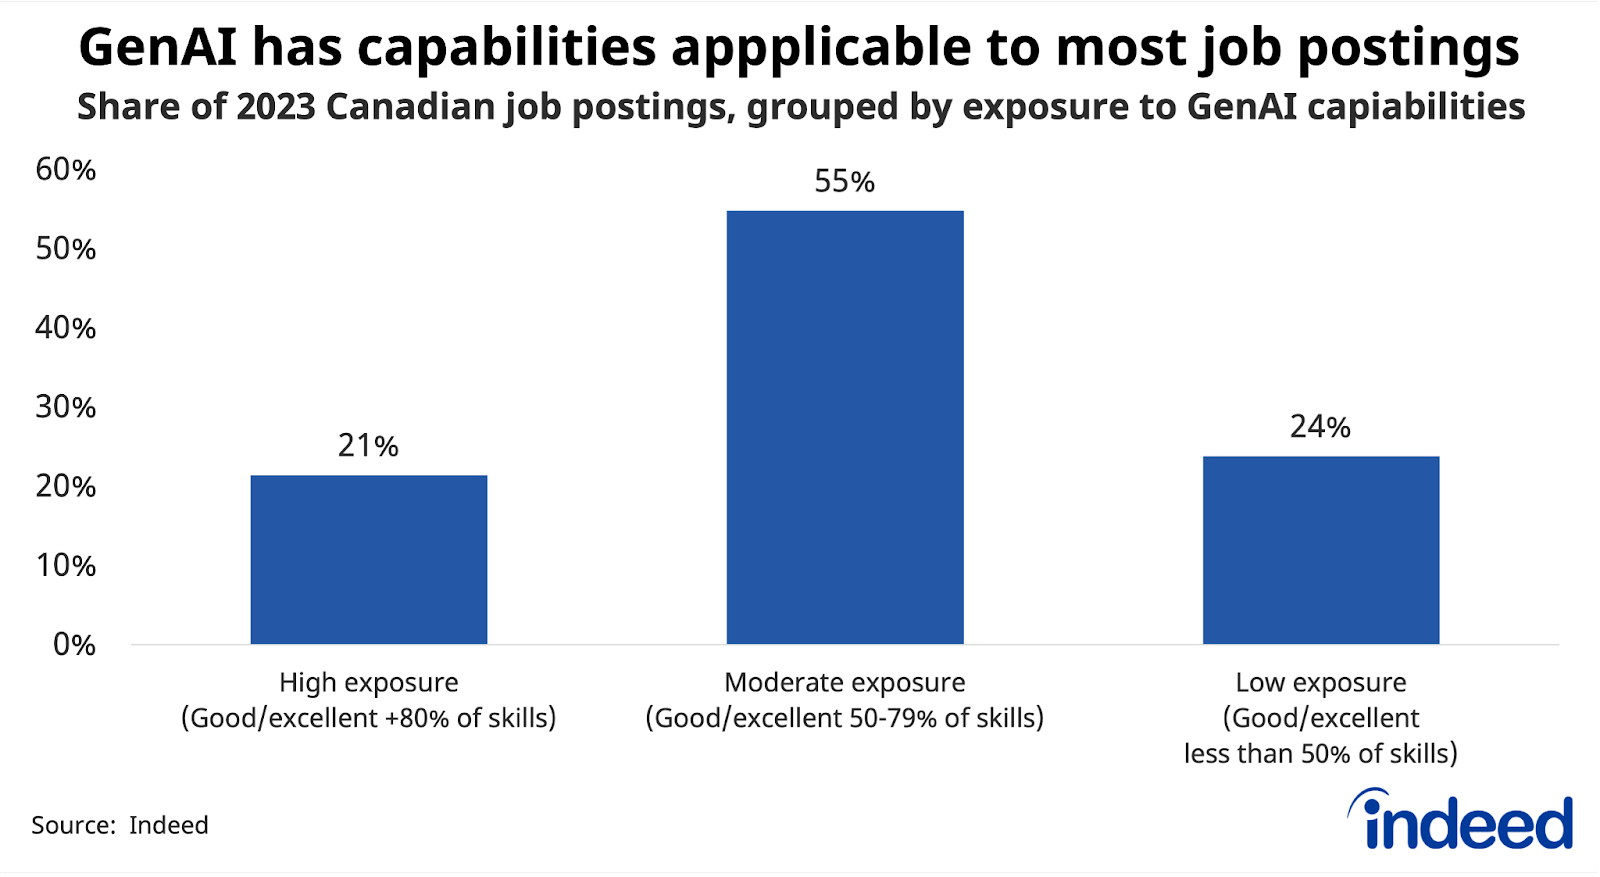 Bar graph titled “GenAI has capabilities applicable to skills in most job postings,” shows the share of 2023 Canadian job postings, grouped by occupational exposure to GenAI capabilities. Overall, 21% of job postings were in high exposure occupations, 56% in moderate exposure, and 24% in low exposure occupations. 